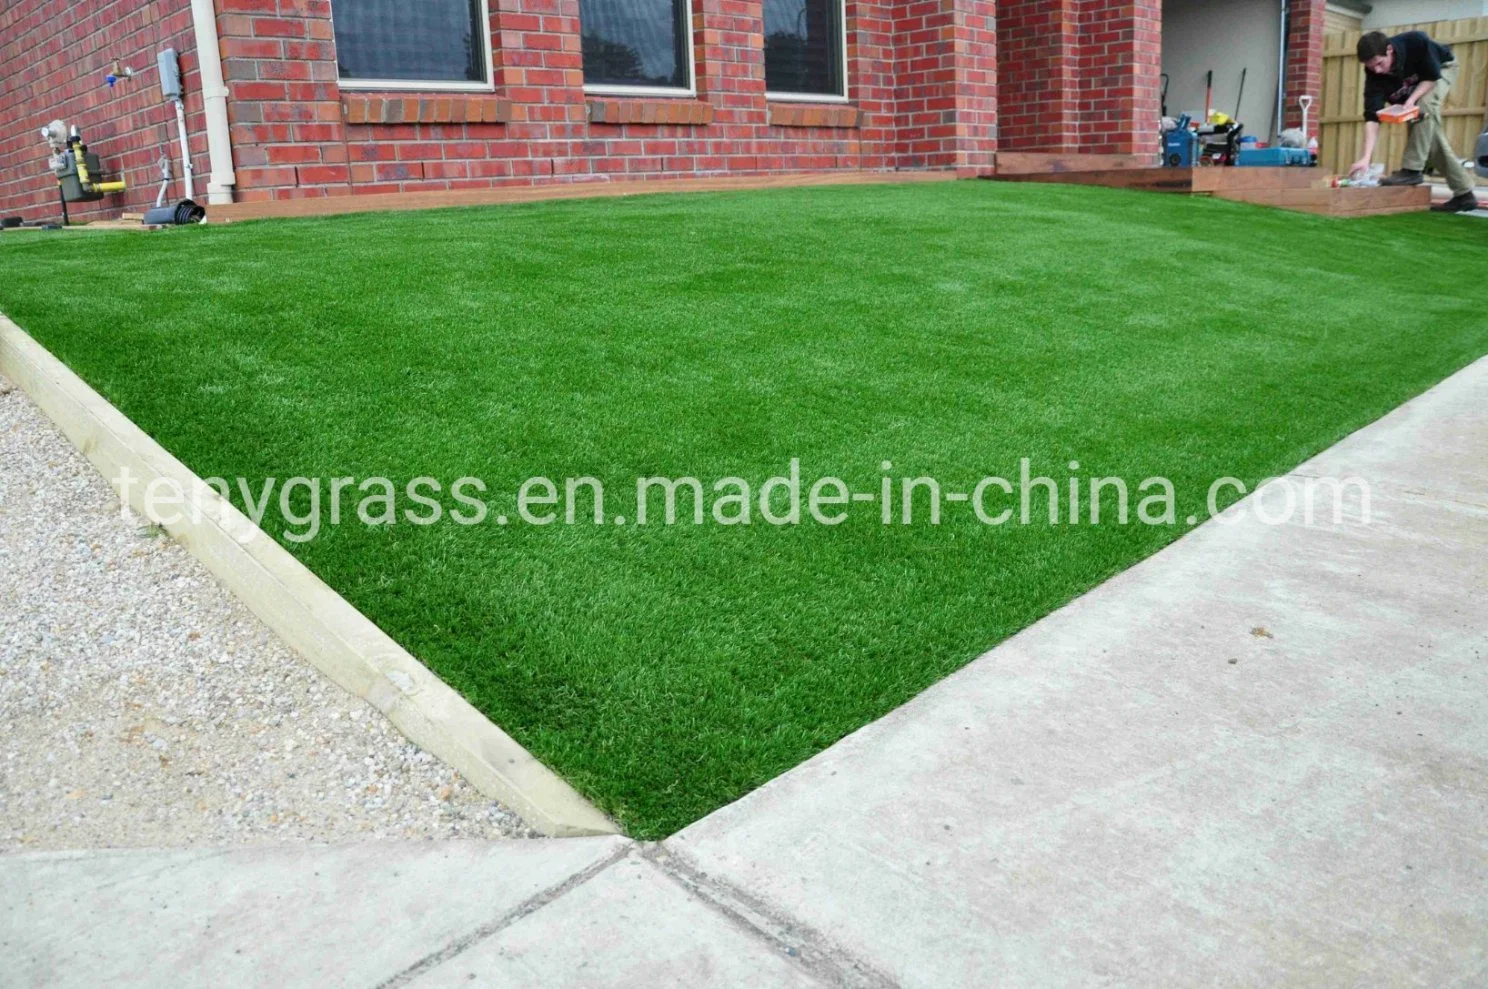 Best Quality Artificial Turf for Dogs and Cats Terrace Garden Grass